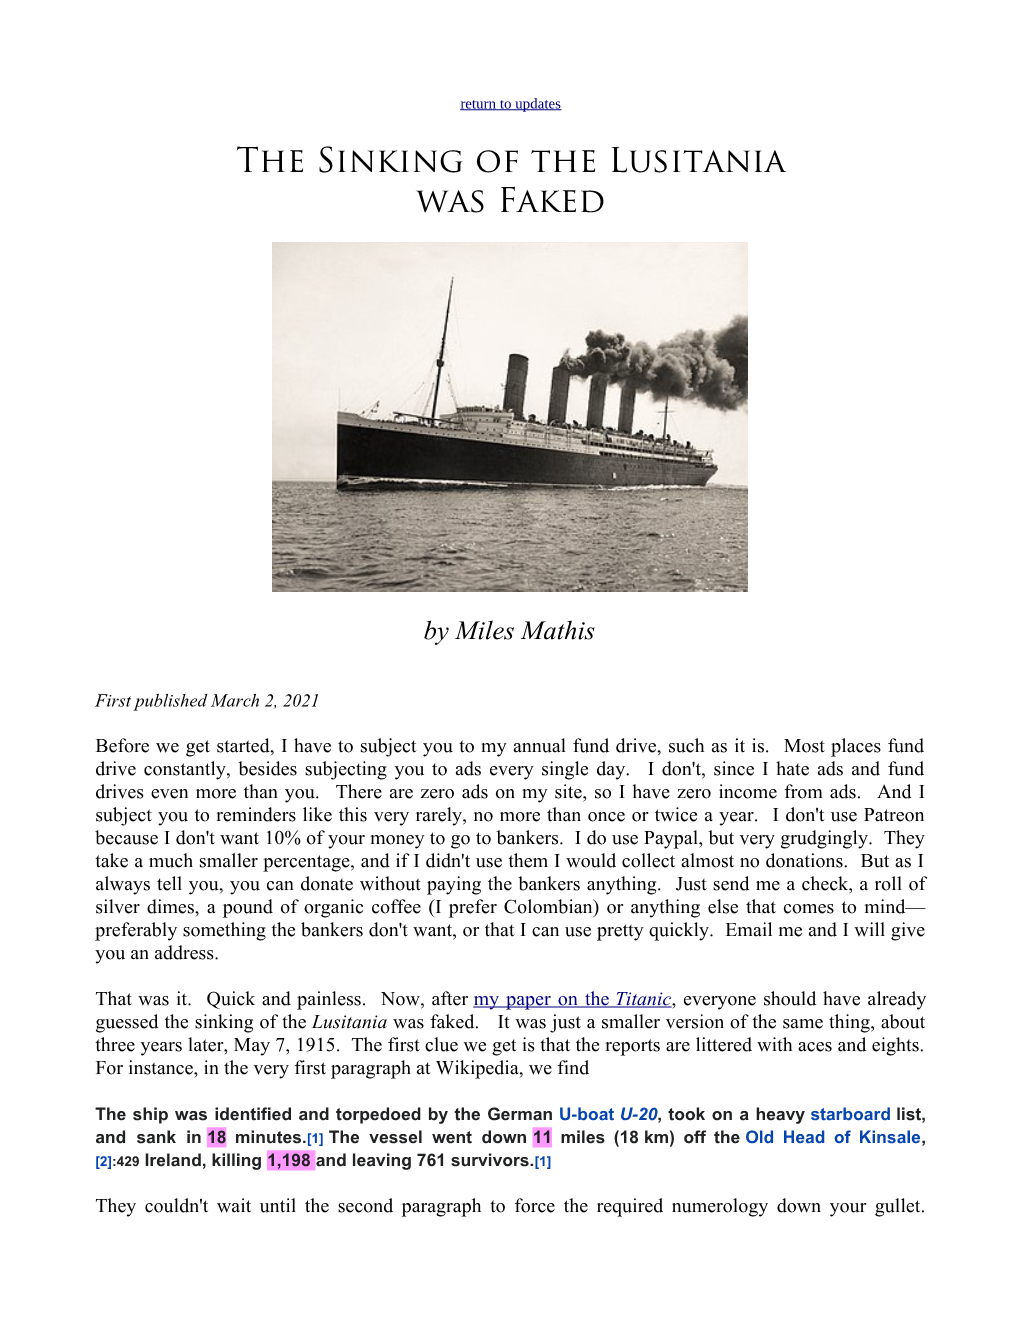 The Sinking of the Lusitania Was Faked